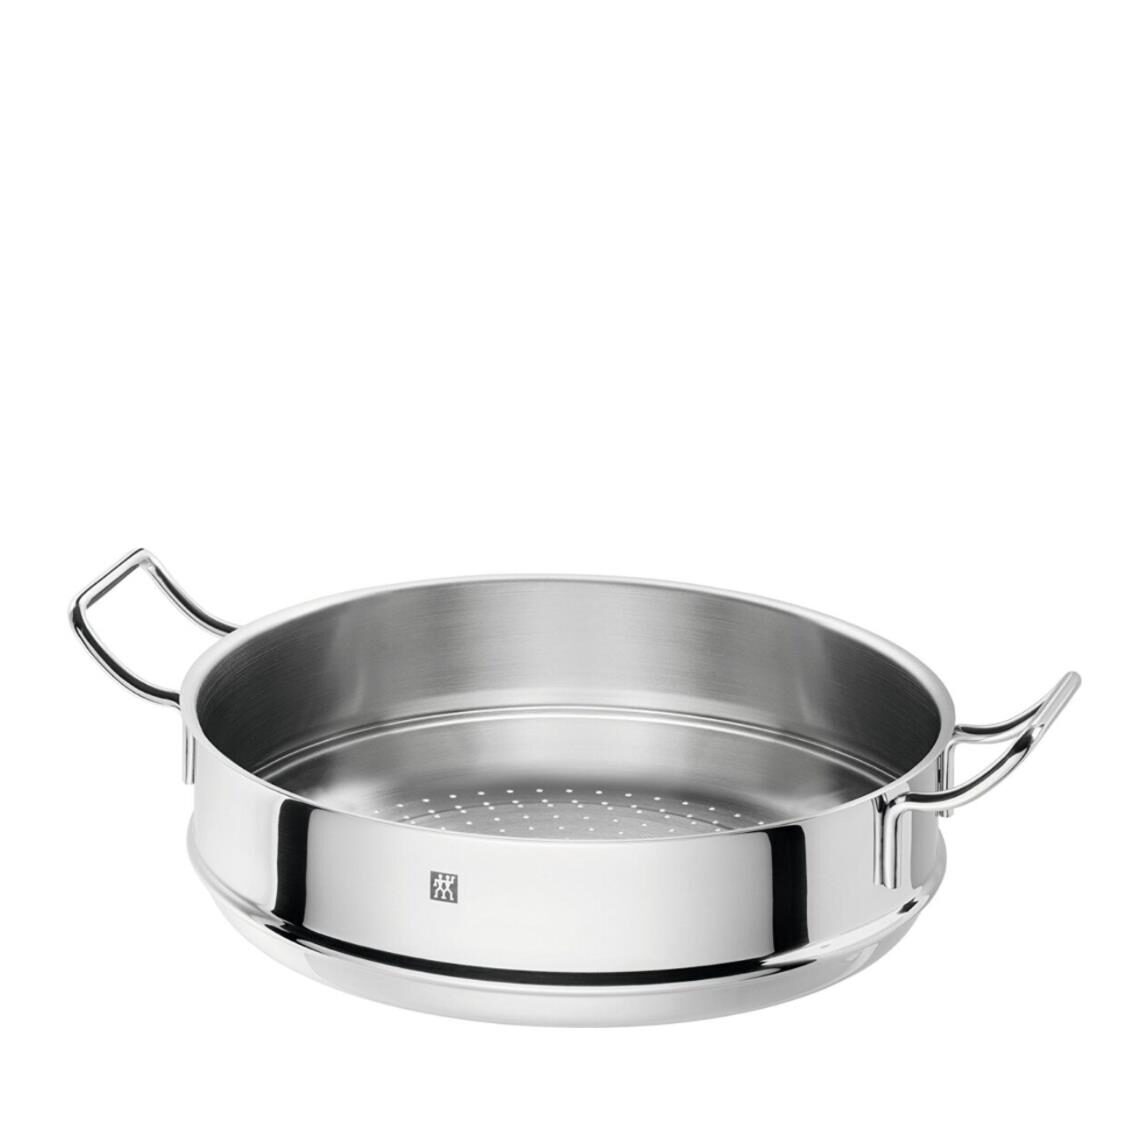 Zwilling Plus Steaming Insert 32Cm 40992-932